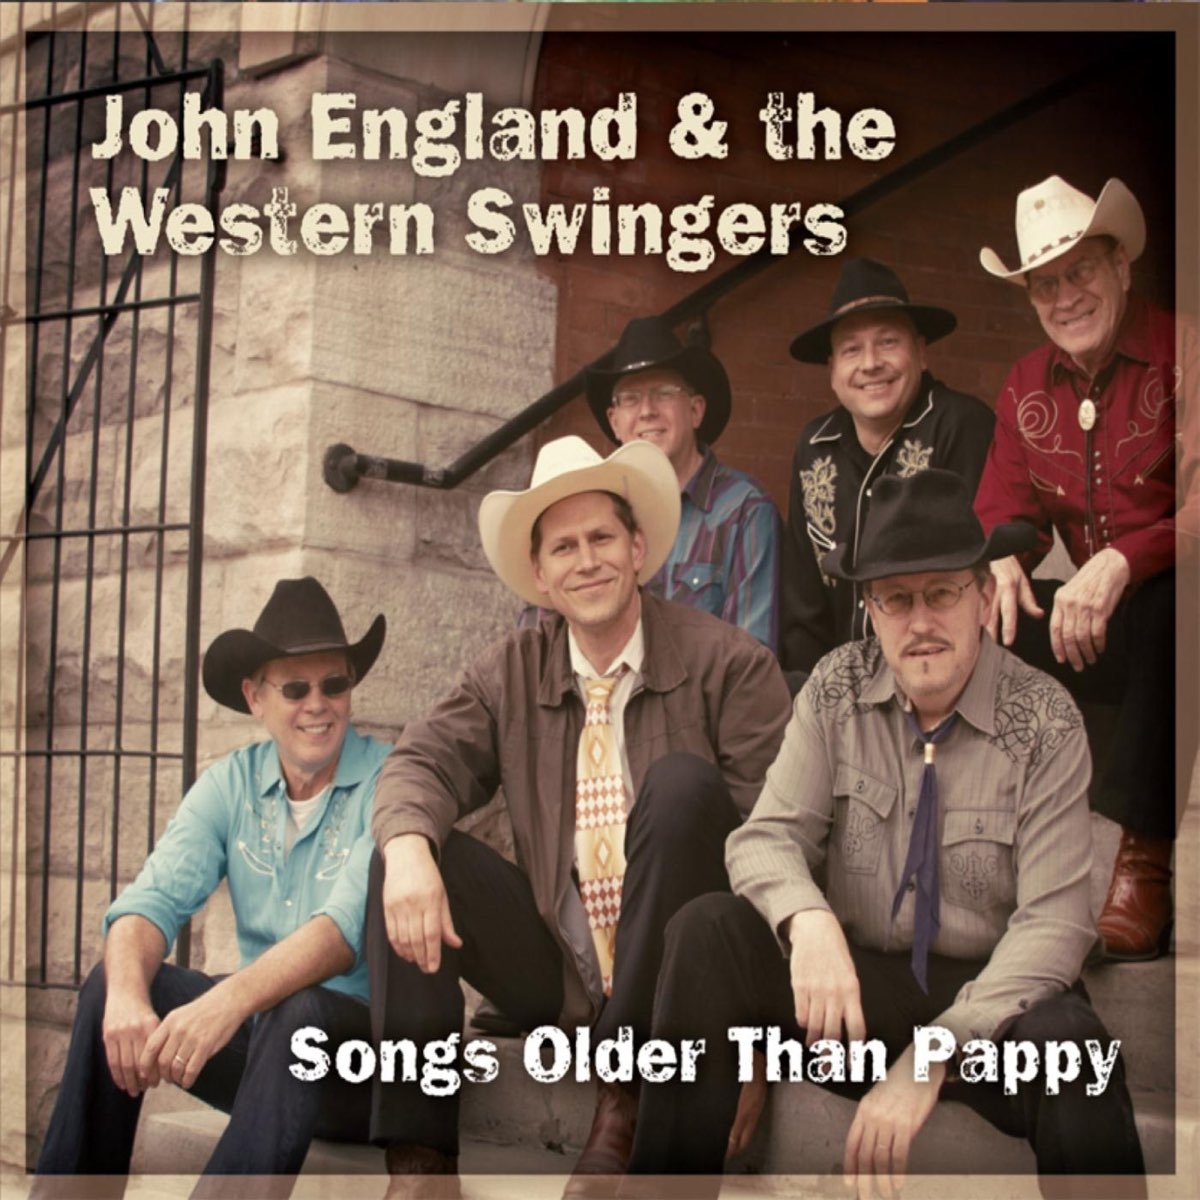 Songs Older Than Pappy by John England pic